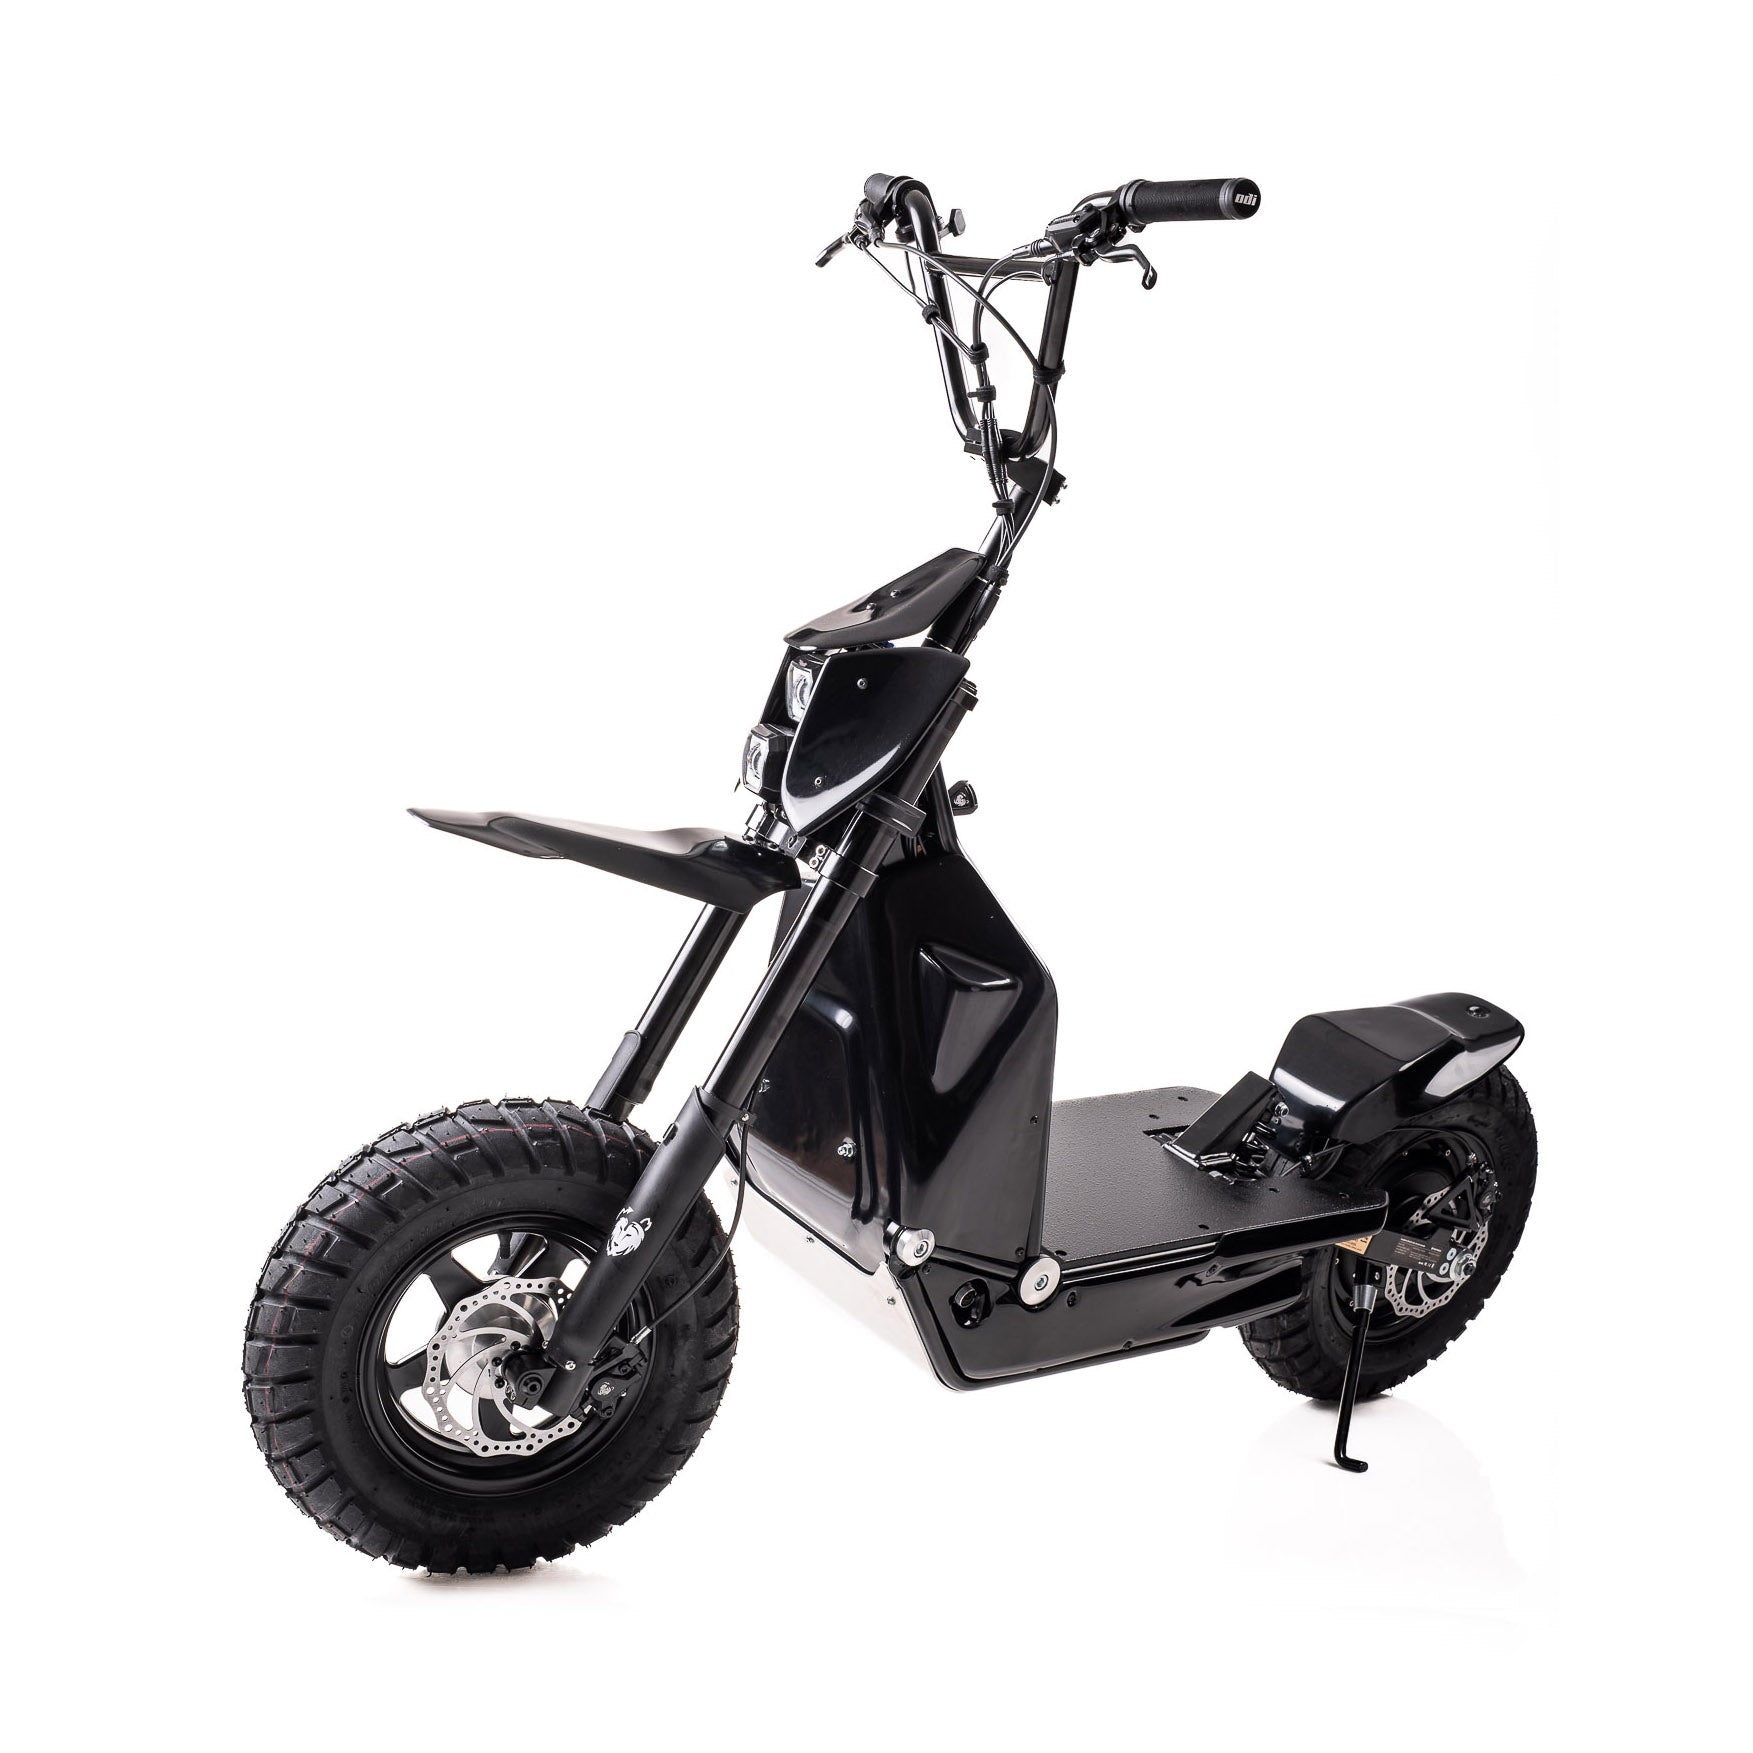 MOSPHERA All-terrain electric scooter 